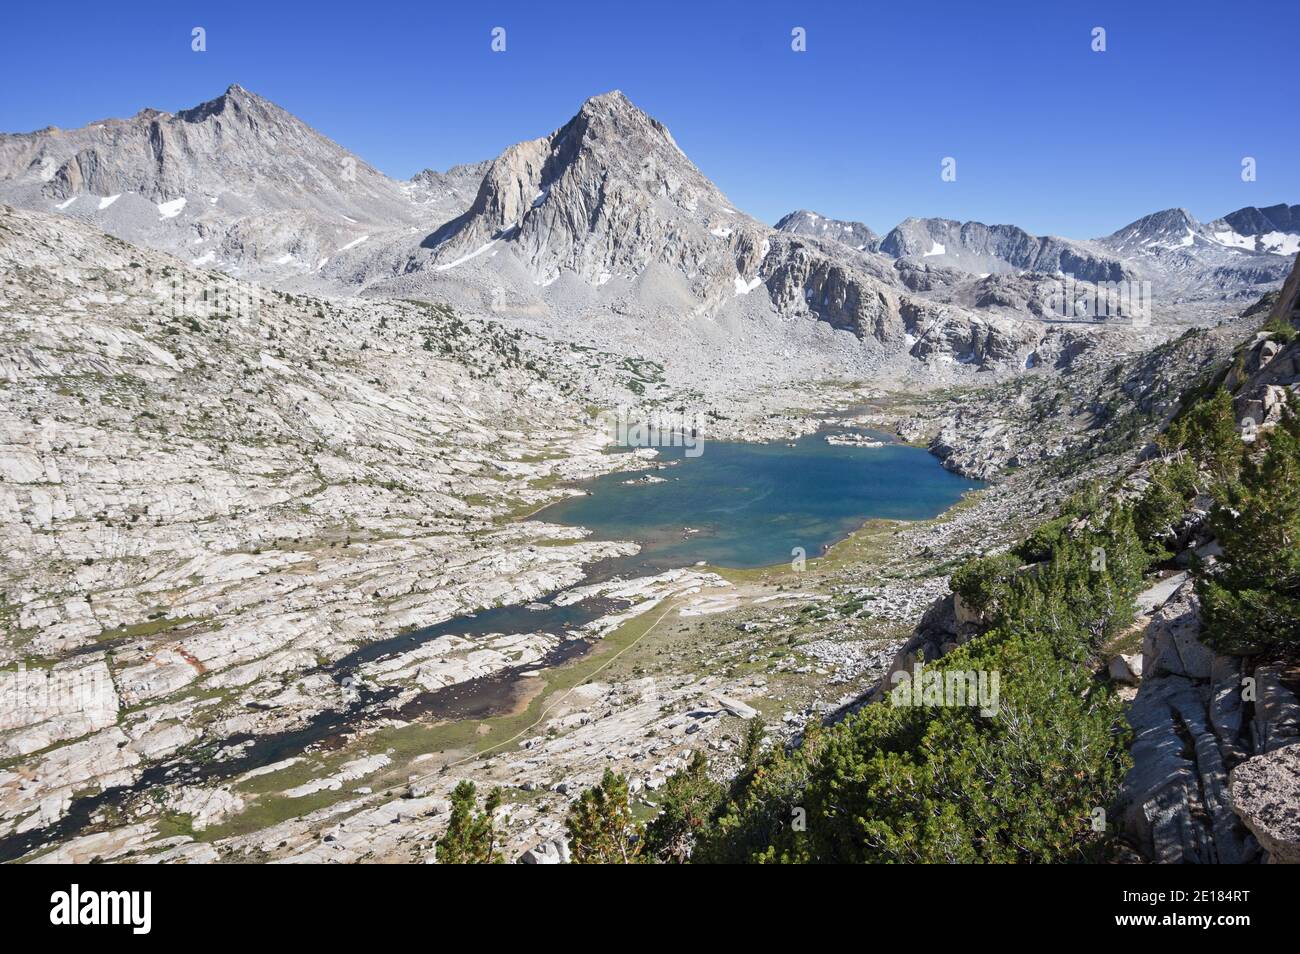 the JMT and PCT pass Saphire Lake in Evolution Basin with Mount Fiske and Mount Huxley Stock Photo